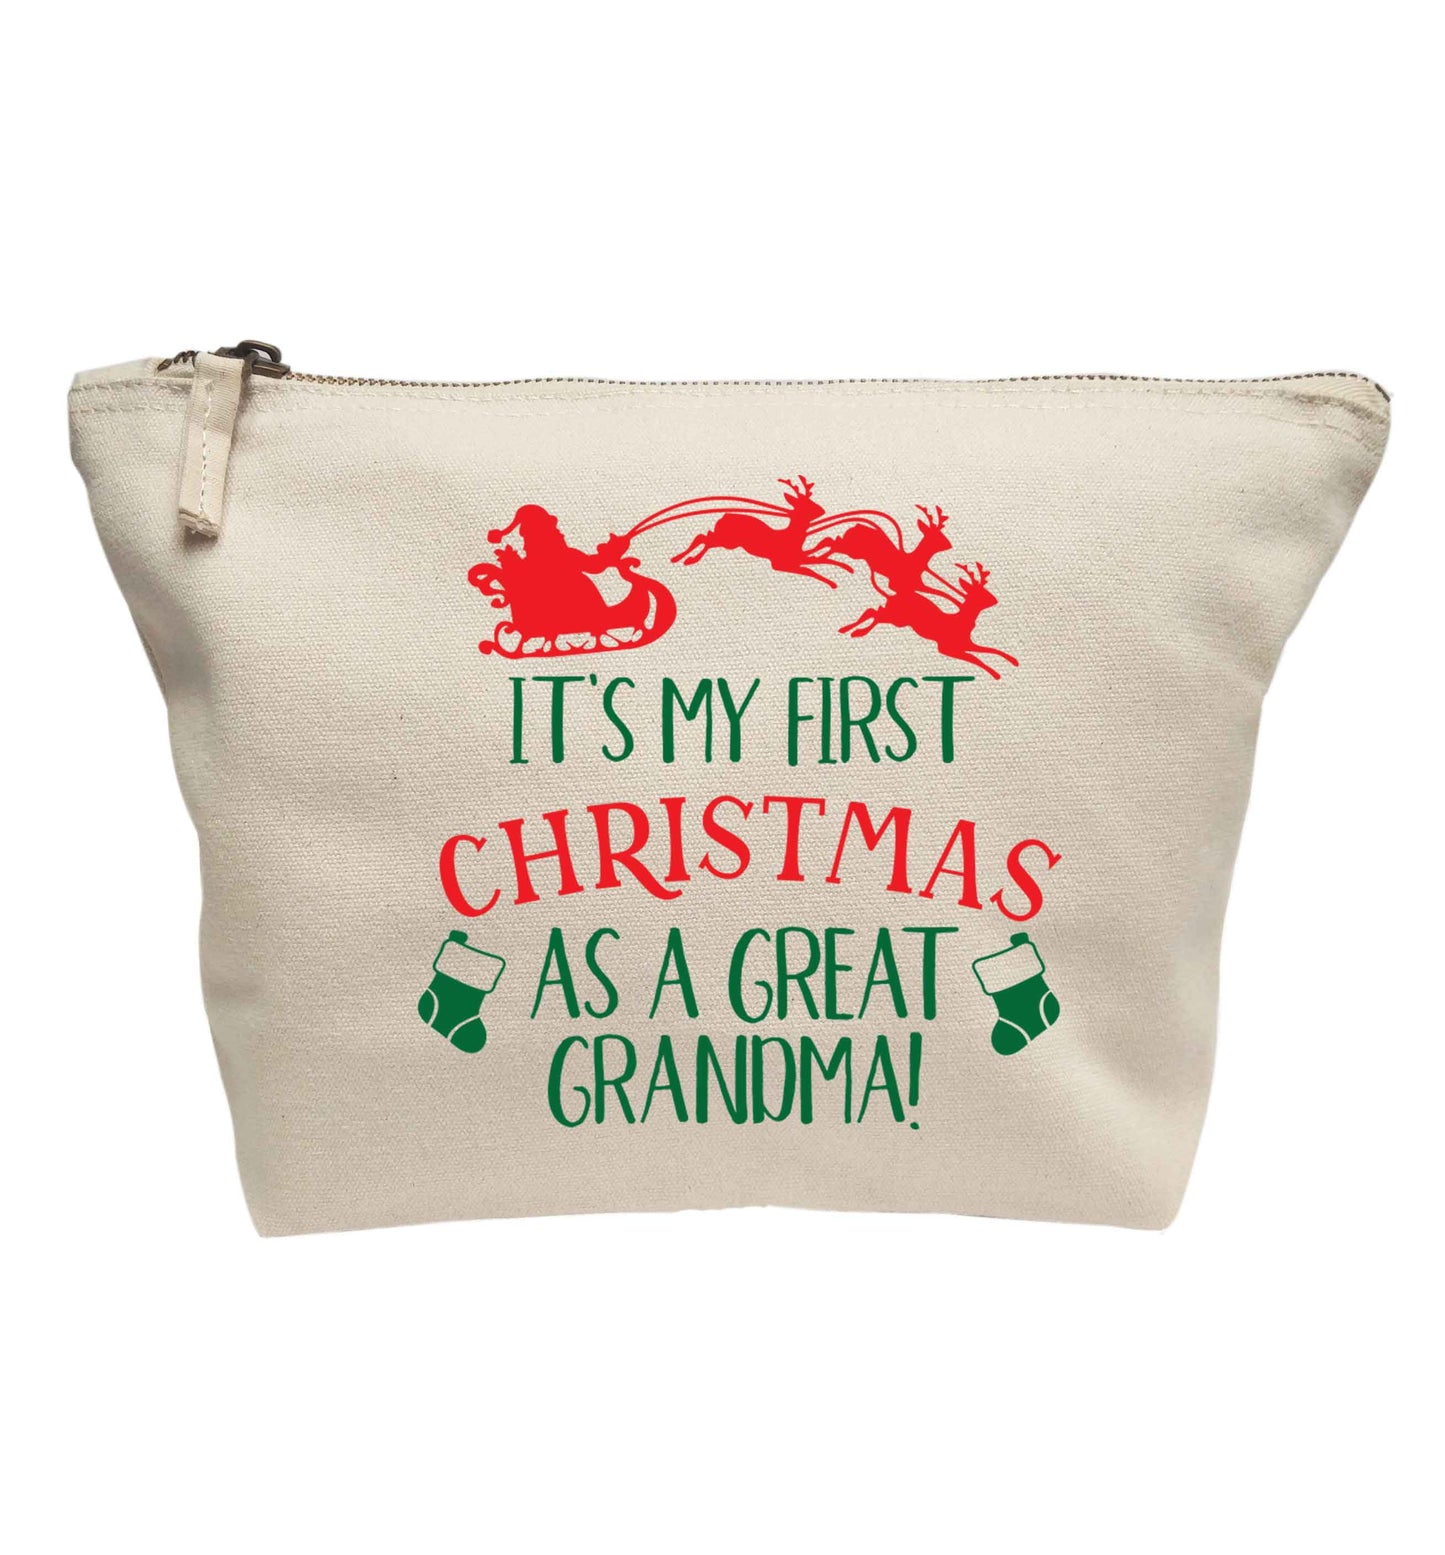 It's my first Christmas as a great grandma! | makeup / wash bag